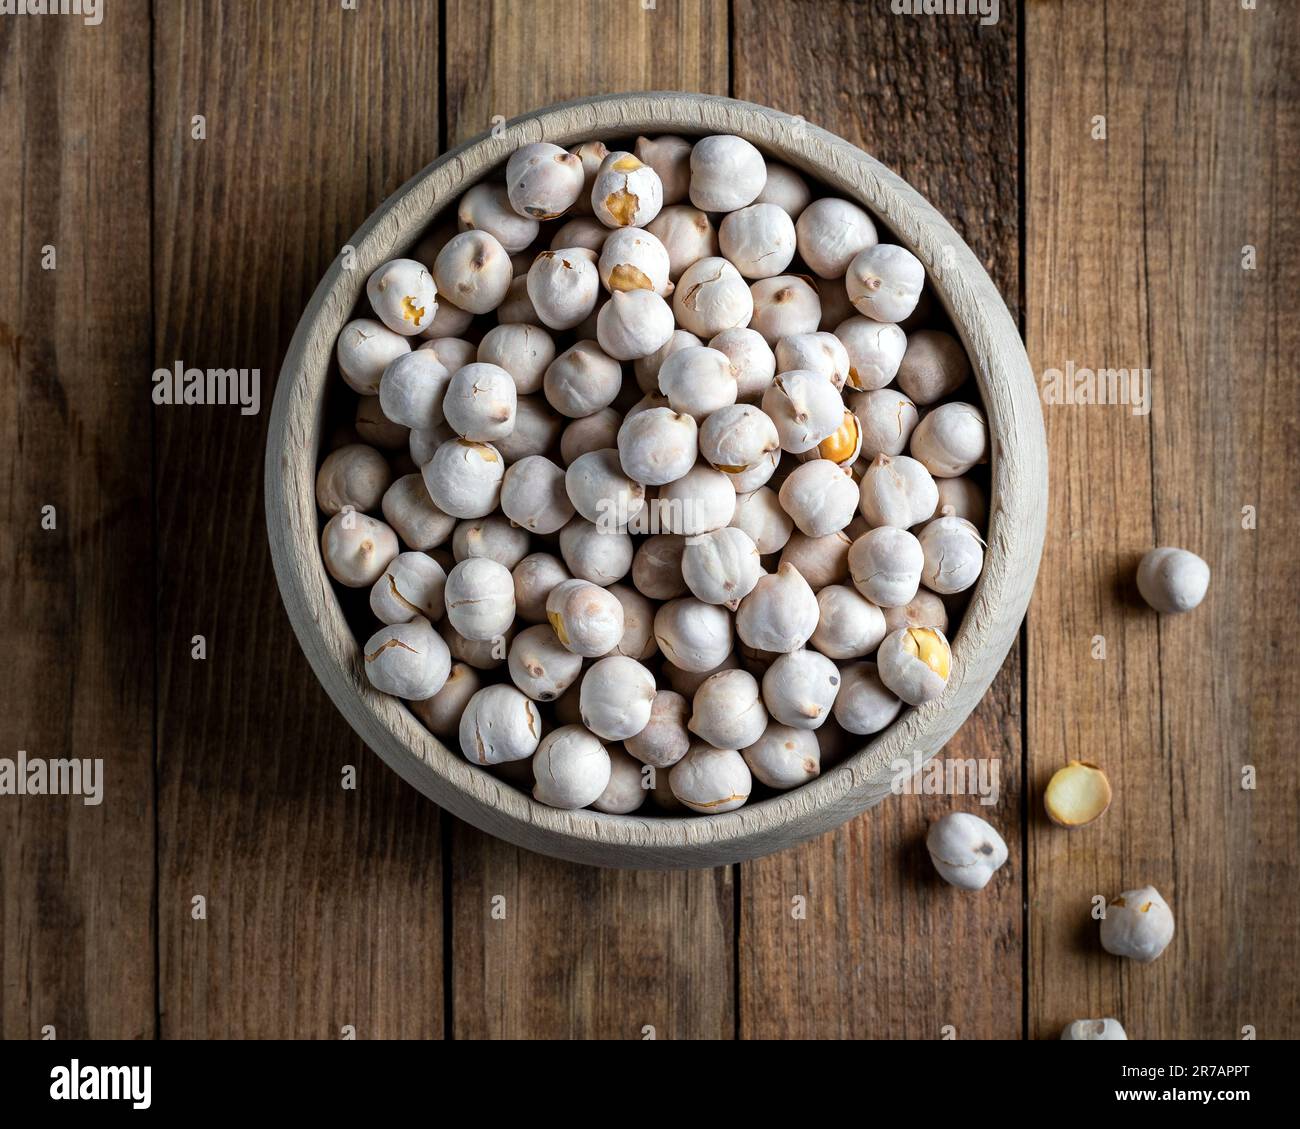 Roasted white chickpeas in wooden bowl, traditional Turkish nut on wooden background. Turkish leblebi, famous nut, stack of yellow white roasted chick Stock Photo